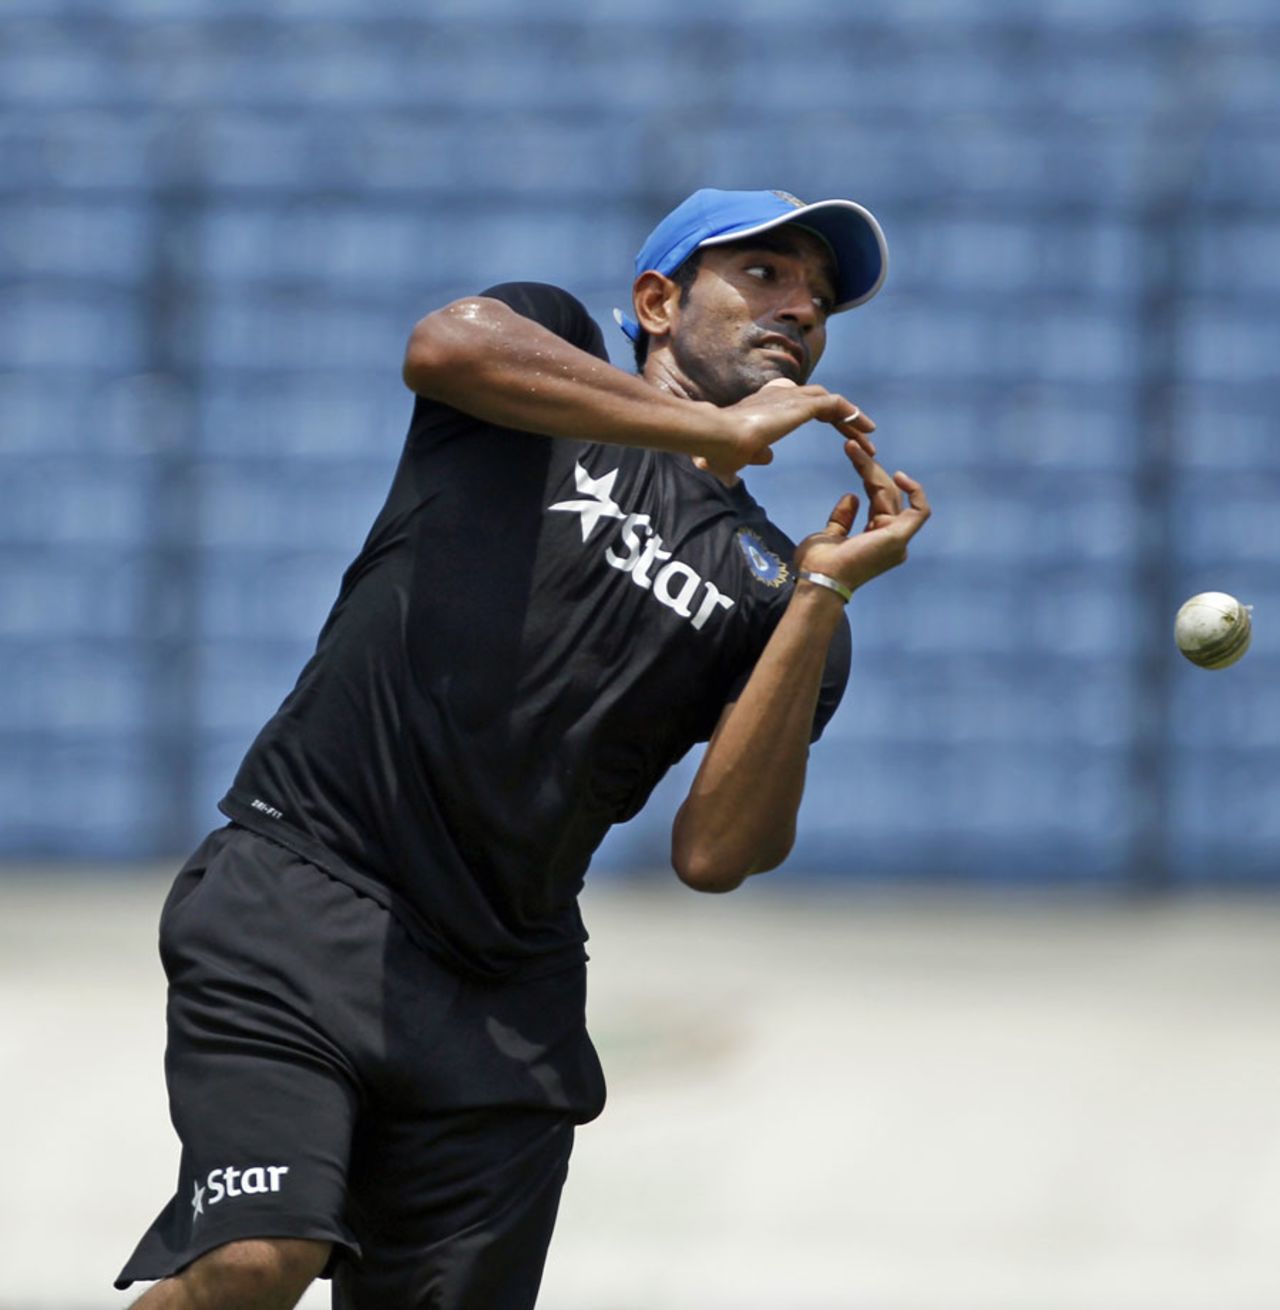 Robin Uthappa during a fielding drill, Mirpur, June 14, 2014